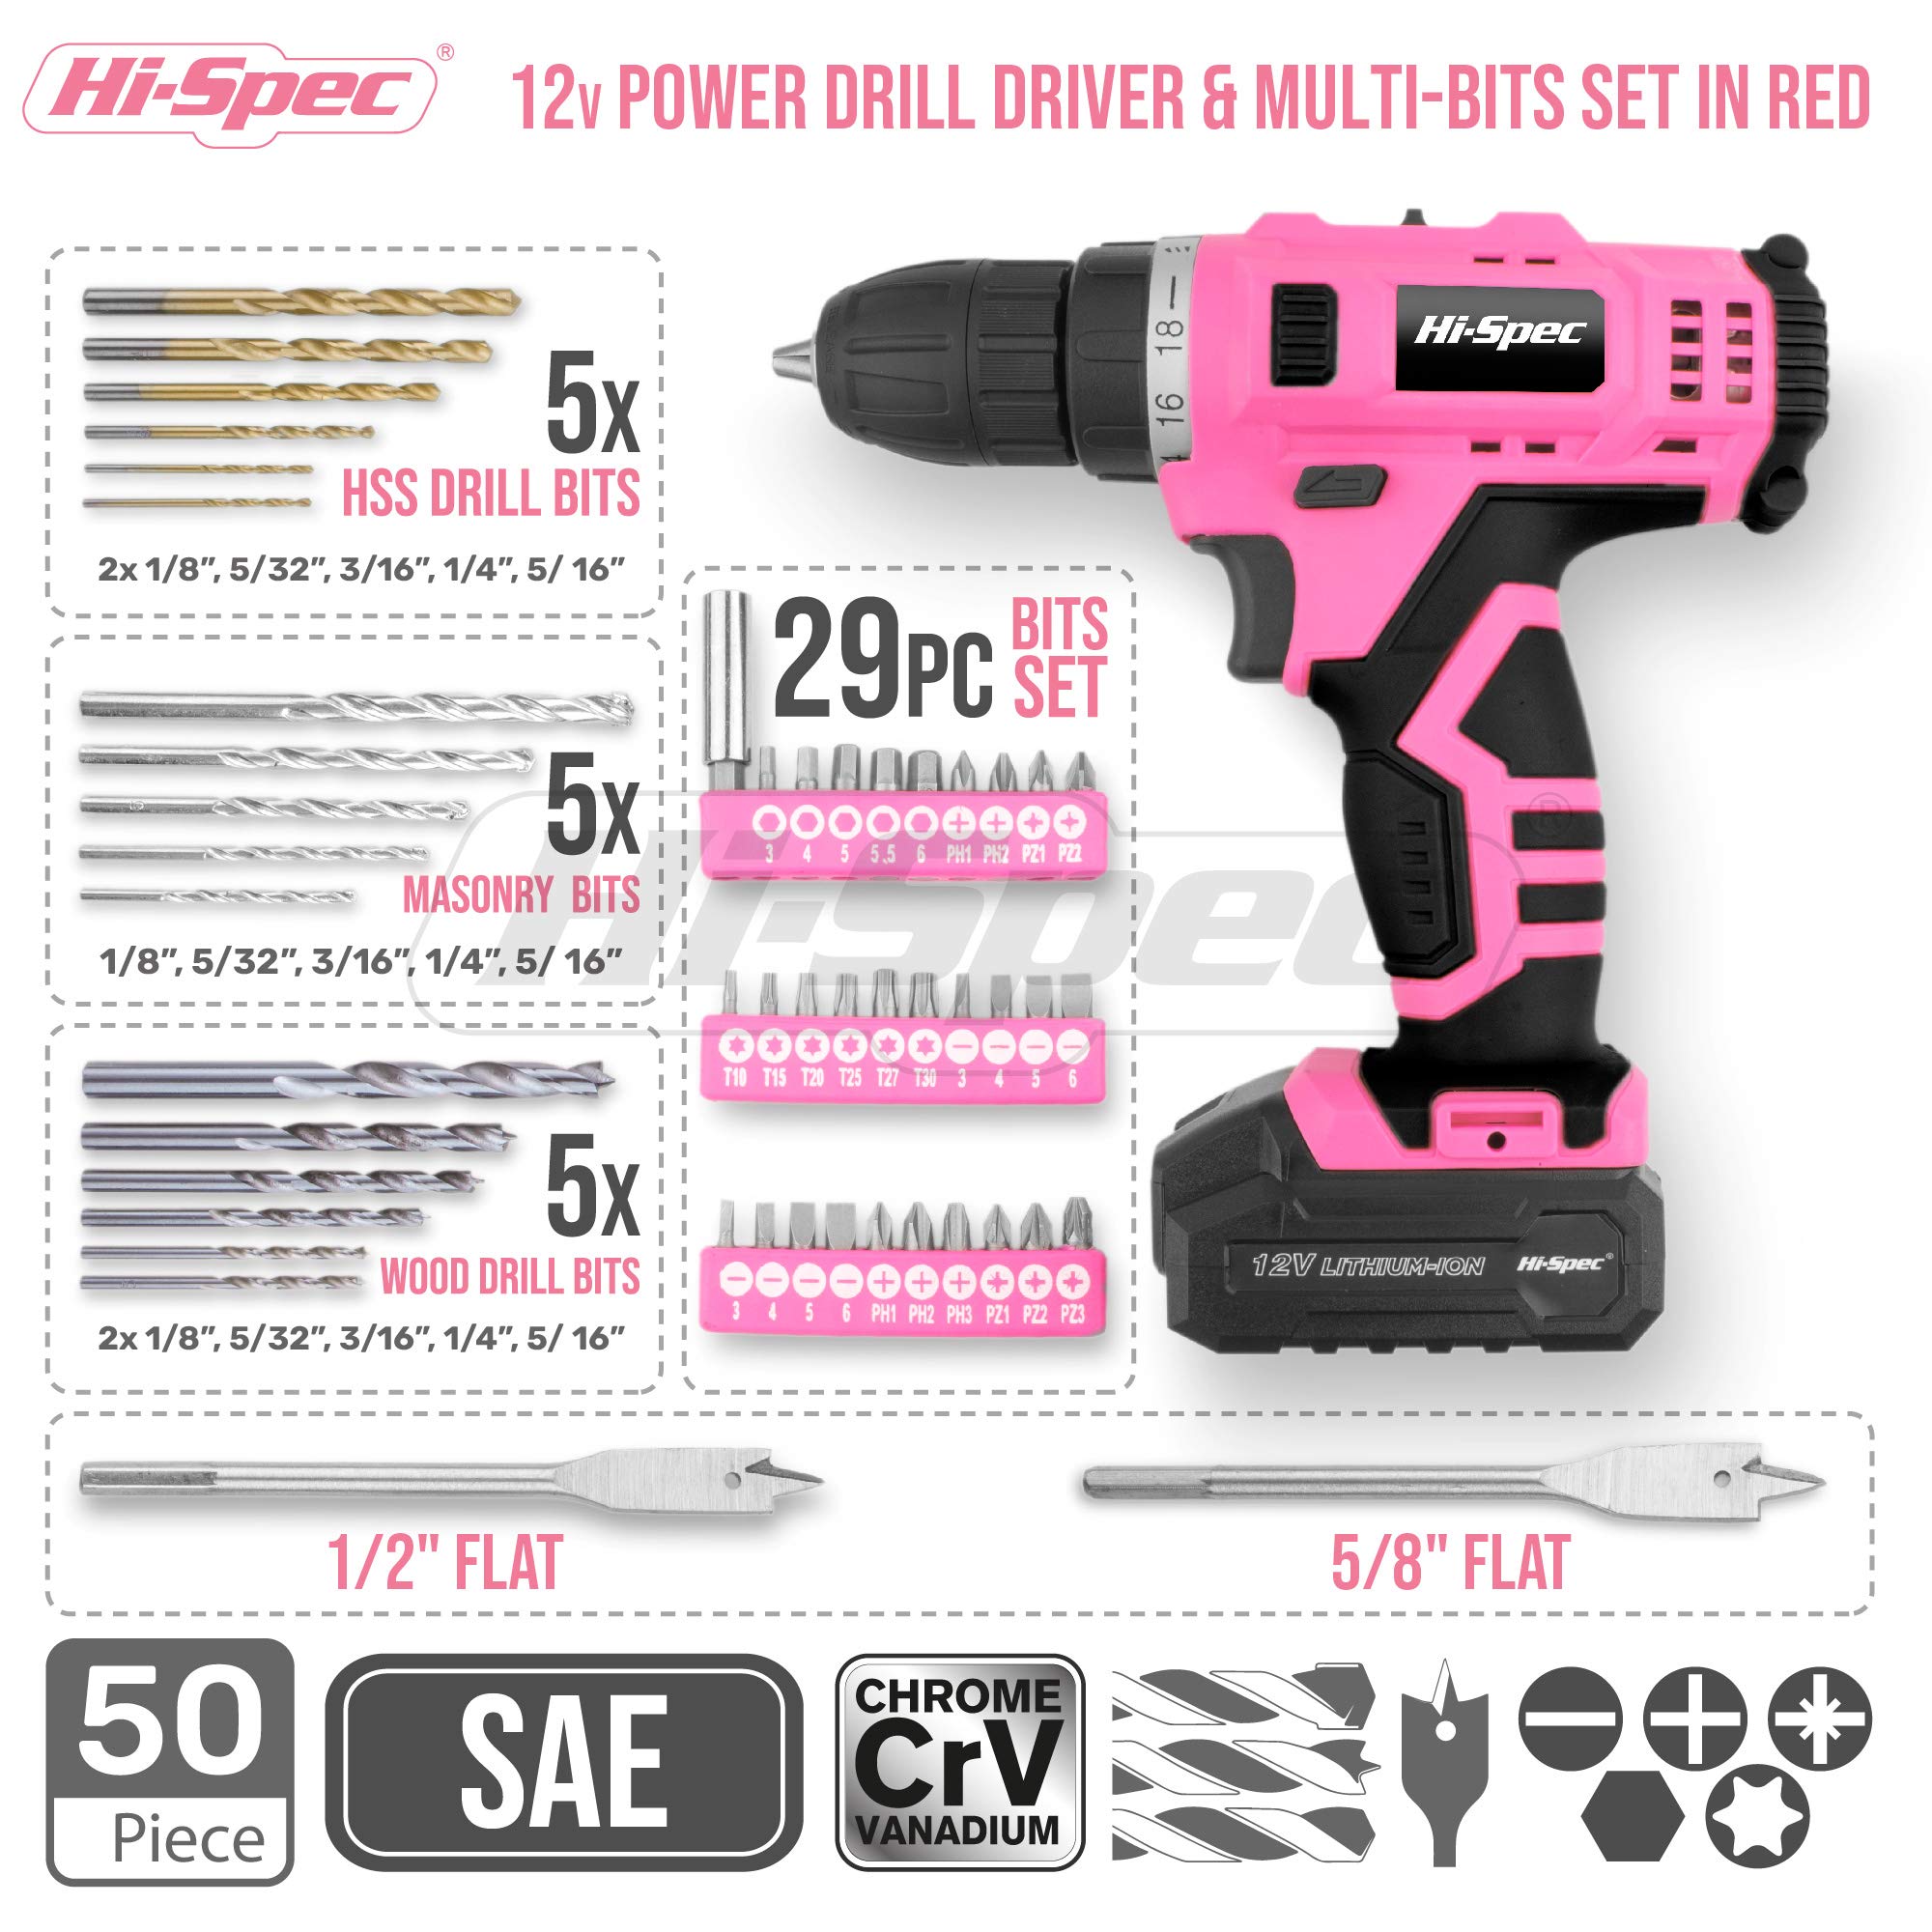 Hi-Spec 50pc 12V Cordless Drill Driver Set - Portable Tool Box and Bit Set for DIY Projects, Home Repair, and Professional Use, for Women and Beginners